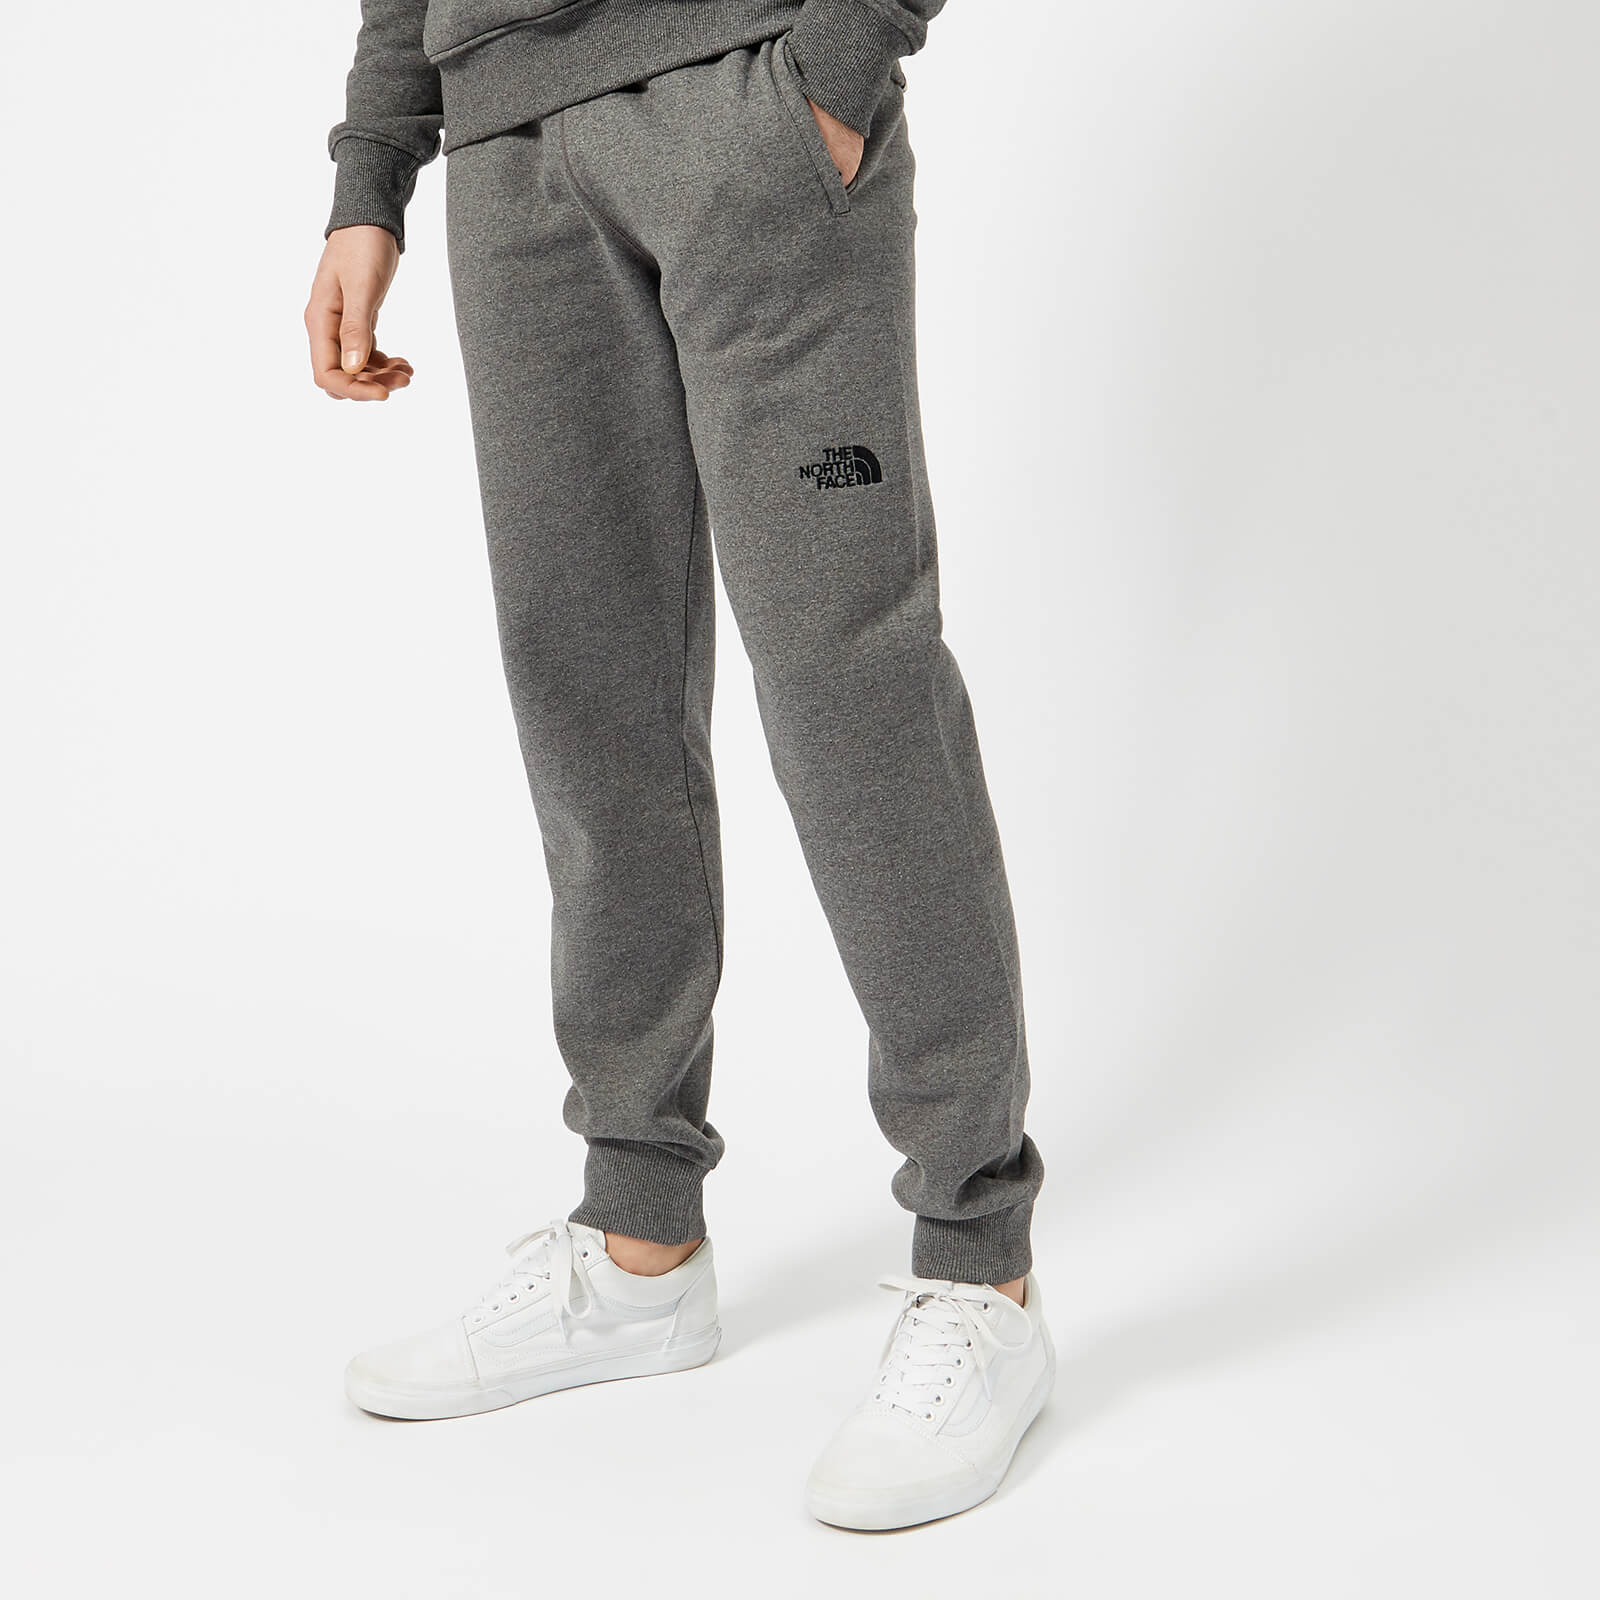 north face bottoms grey